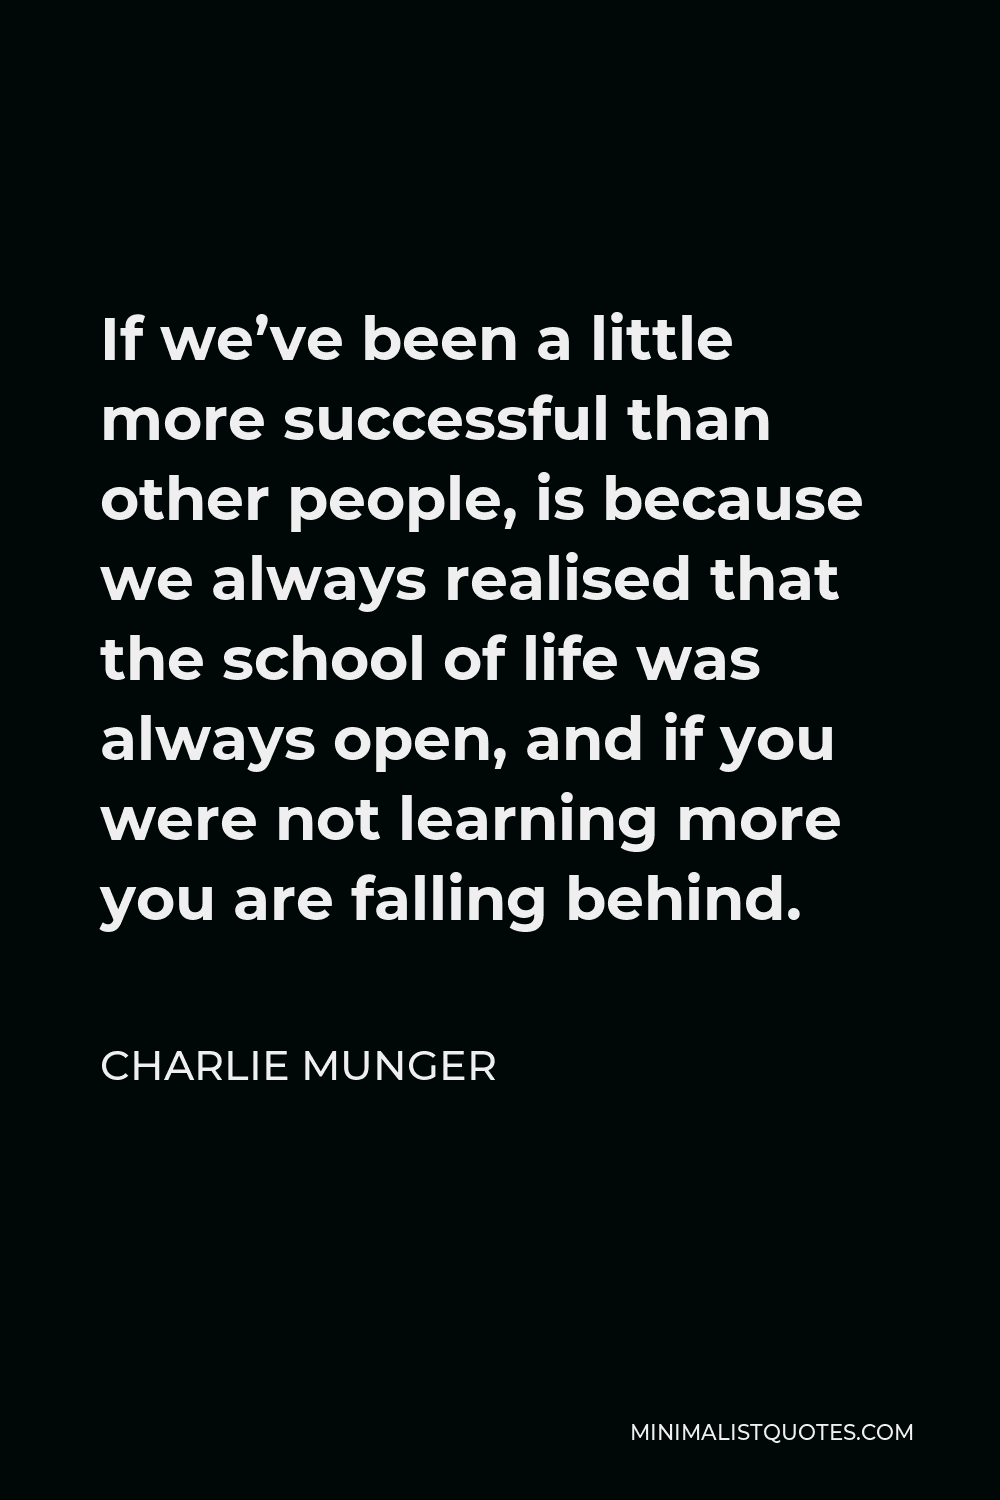 Charlie Munger Quote - If we’ve been a little more successful than other people, is because we always realised that the school of life was always open, and if you were not learning more you are falling behind.